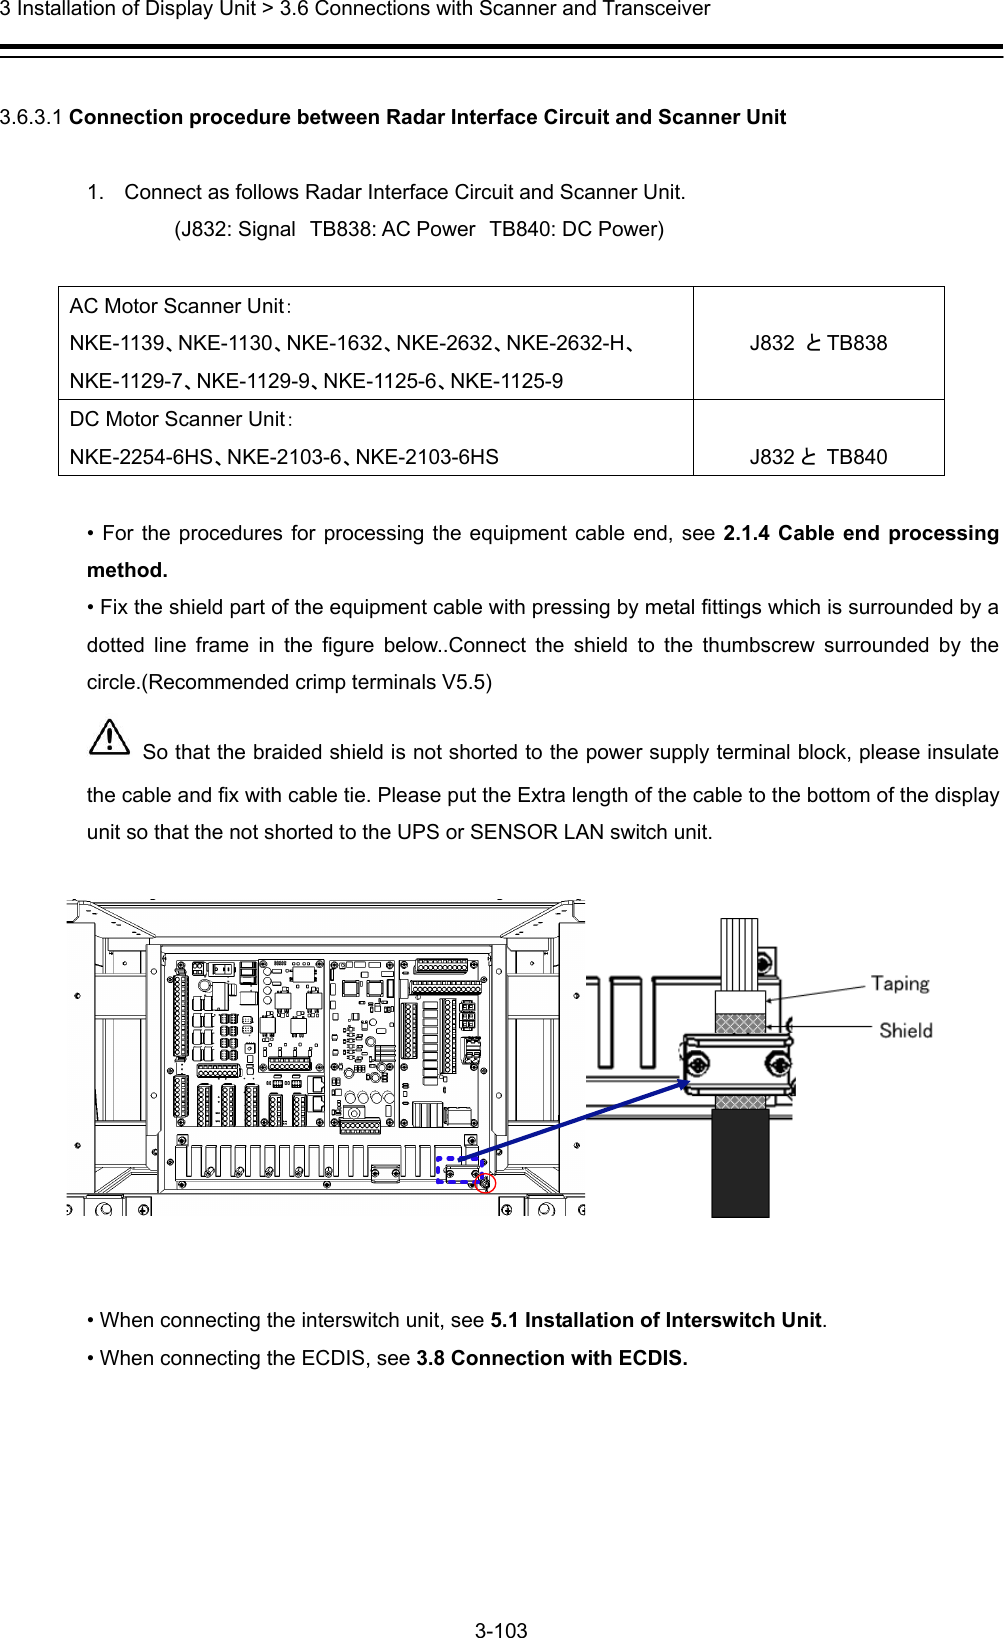  3 Installation of Display Unit &gt; 3.6 Connections with Scanner and Transceiver 3-103   3.6.3.1 Connection procedure between Radar Interface Circuit and Scanner Unit  1.  Connect as follows Radar Interface Circuit and Scanner Unit.       (J832: Signal TB838: AC Power TB840: DC Power)  AC Motor Scanner Unit： NKE-1139、NKE-1130、NKE-1632、NKE-2632、NKE-2632-H、NKE-1129-7、NKE-1129-9、NKE-1125-6、NKE-1125-9  J832  とTB838 DC Motor Scanner Unit： NKE-2254-6HS、NKE-2103-6、NKE-2103-6HS  J832 と TB840  • For the procedures for processing the equipment cable end, see 2.1.4 Cable end processing method. • Fix the shield part of the equipment cable with pressing by metal fittings which is surrounded by a dotted line frame in the figure below..Connect the shield to the thumbscrew surrounded by the circle.(Recommended crimp terminals V5.5)   So that the braided shield is not shorted to the power supply terminal block, please insulate the cable and fix with cable tie. Please put the Extra length of the cable to the bottom of the display unit so that the not shorted to the UPS or SENSOR LAN switch unit.     • When connecting the interswitch unit, see 5.1 Installation of Interswitch Unit. • When connecting the ECDIS, see 3.8 Connection with ECDIS.  